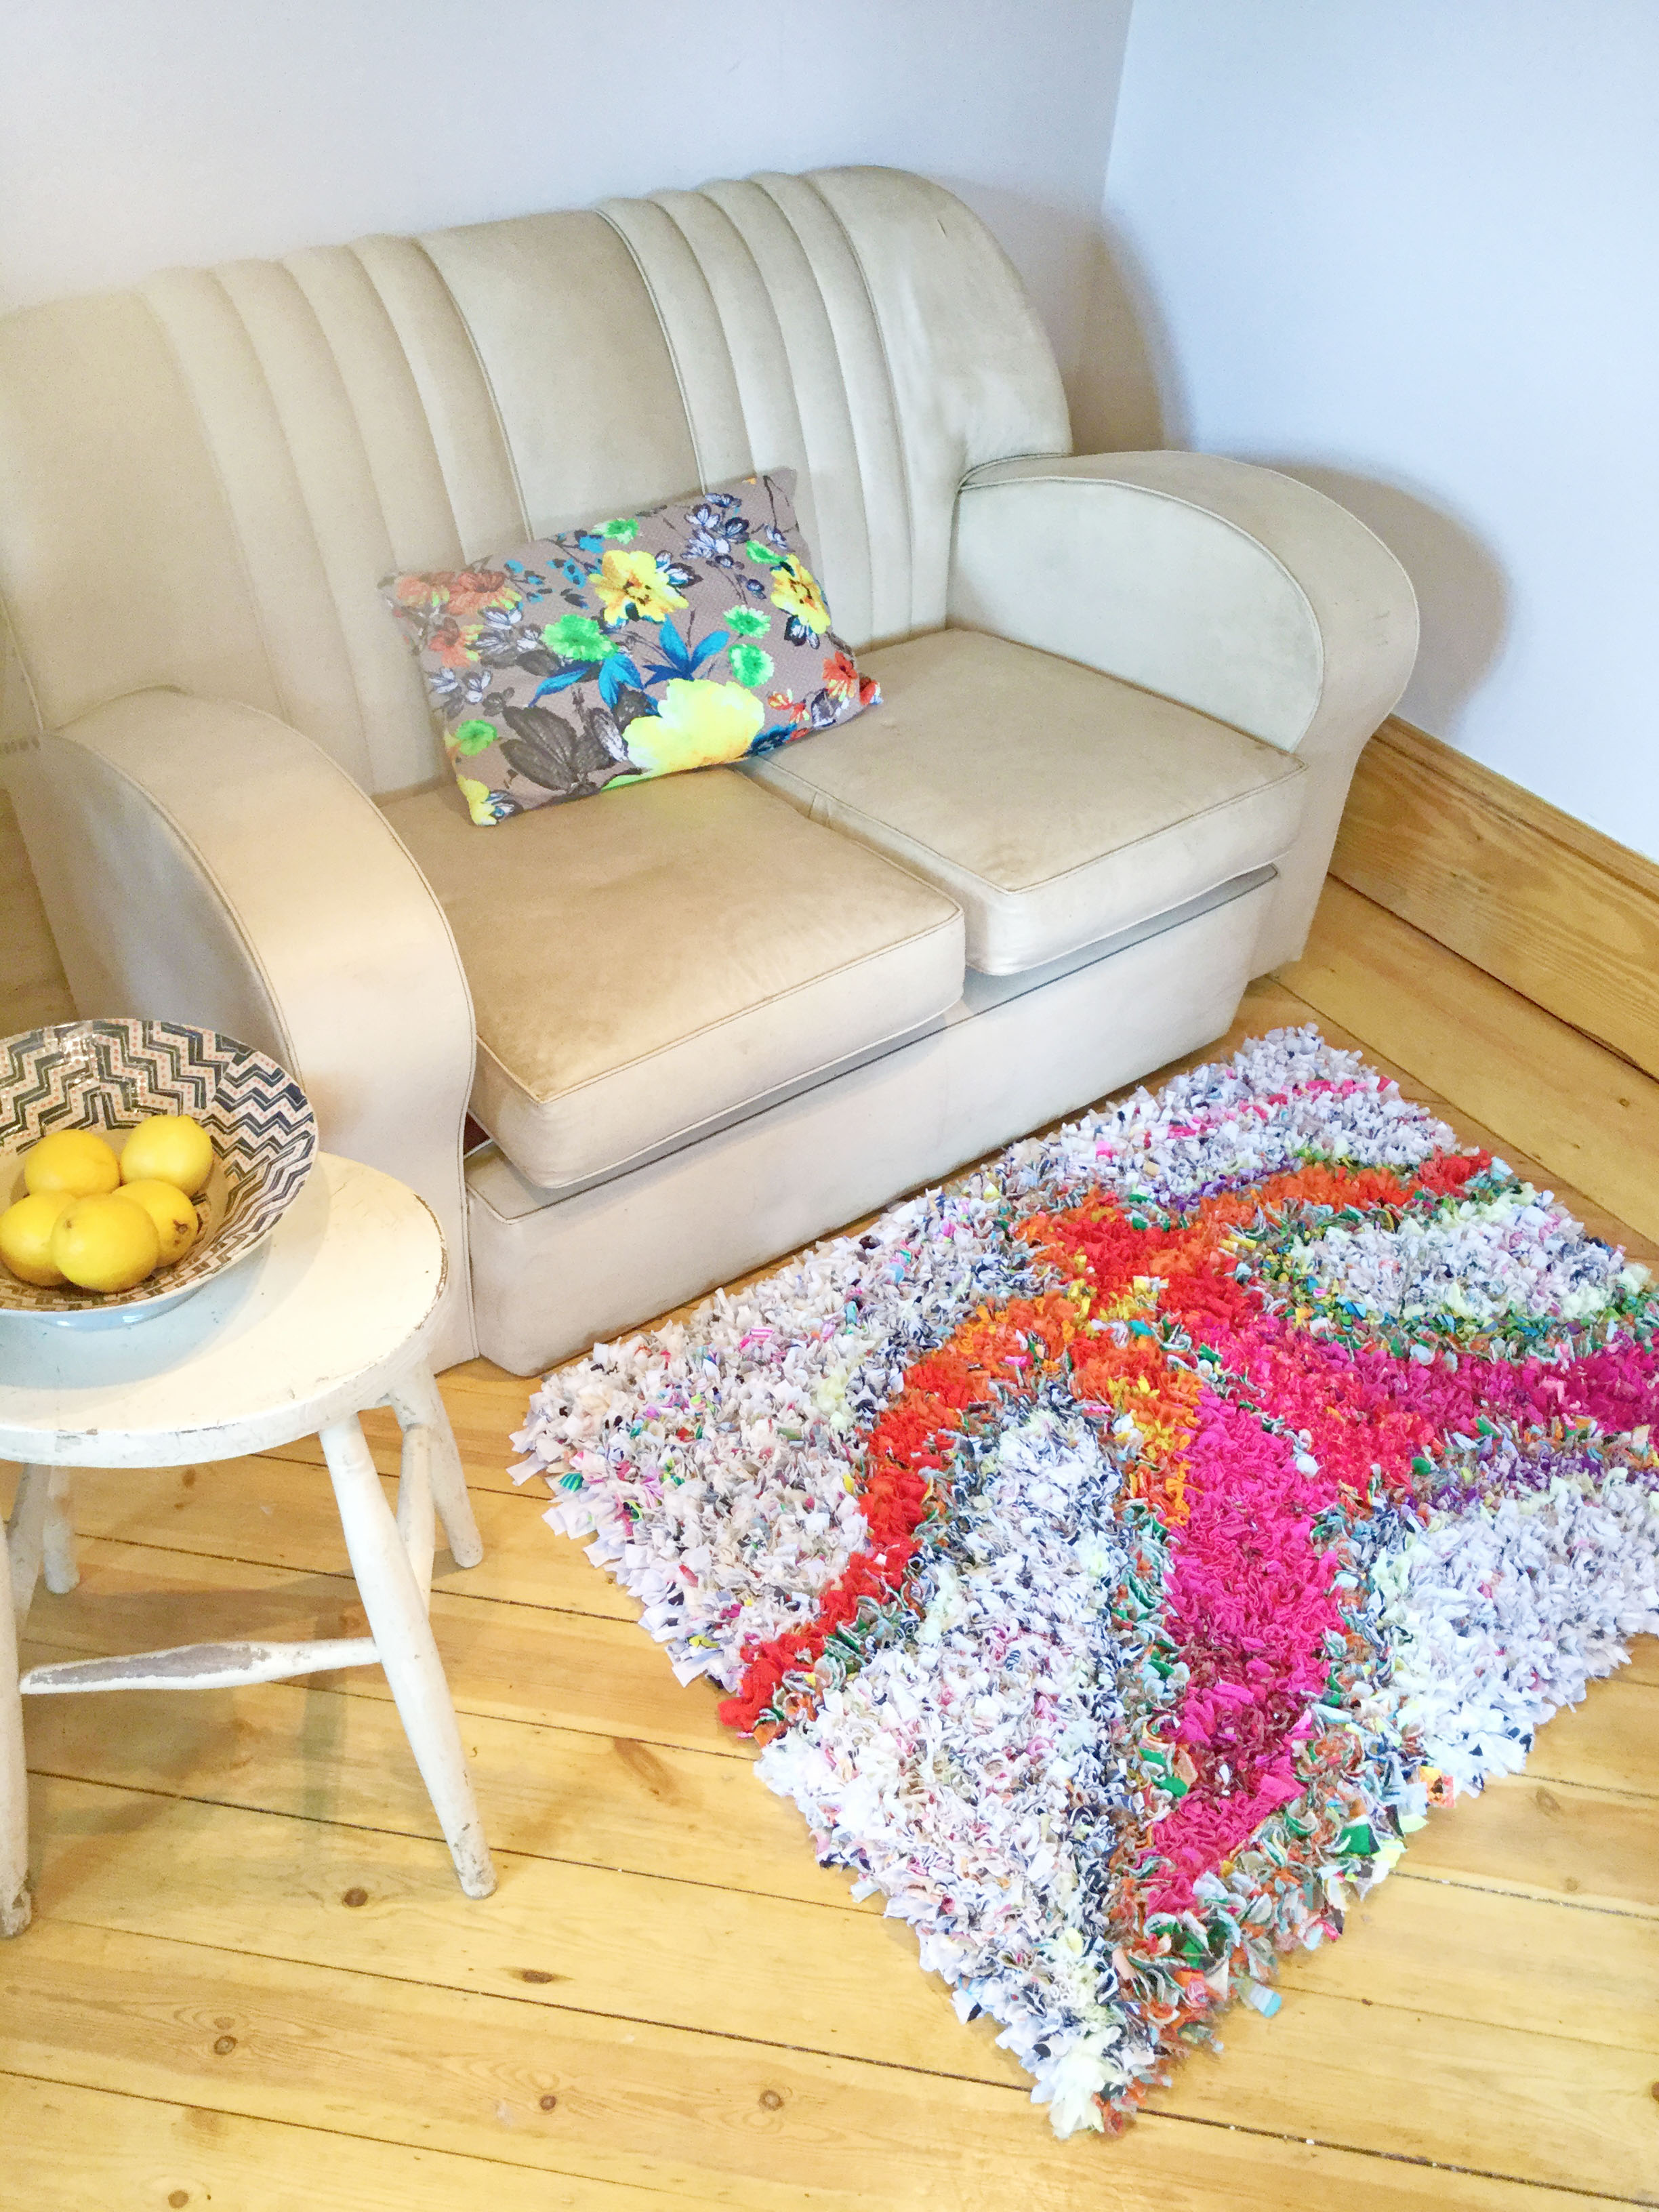 A unique rag rug in front of a white vintage sofa on a wooden floor